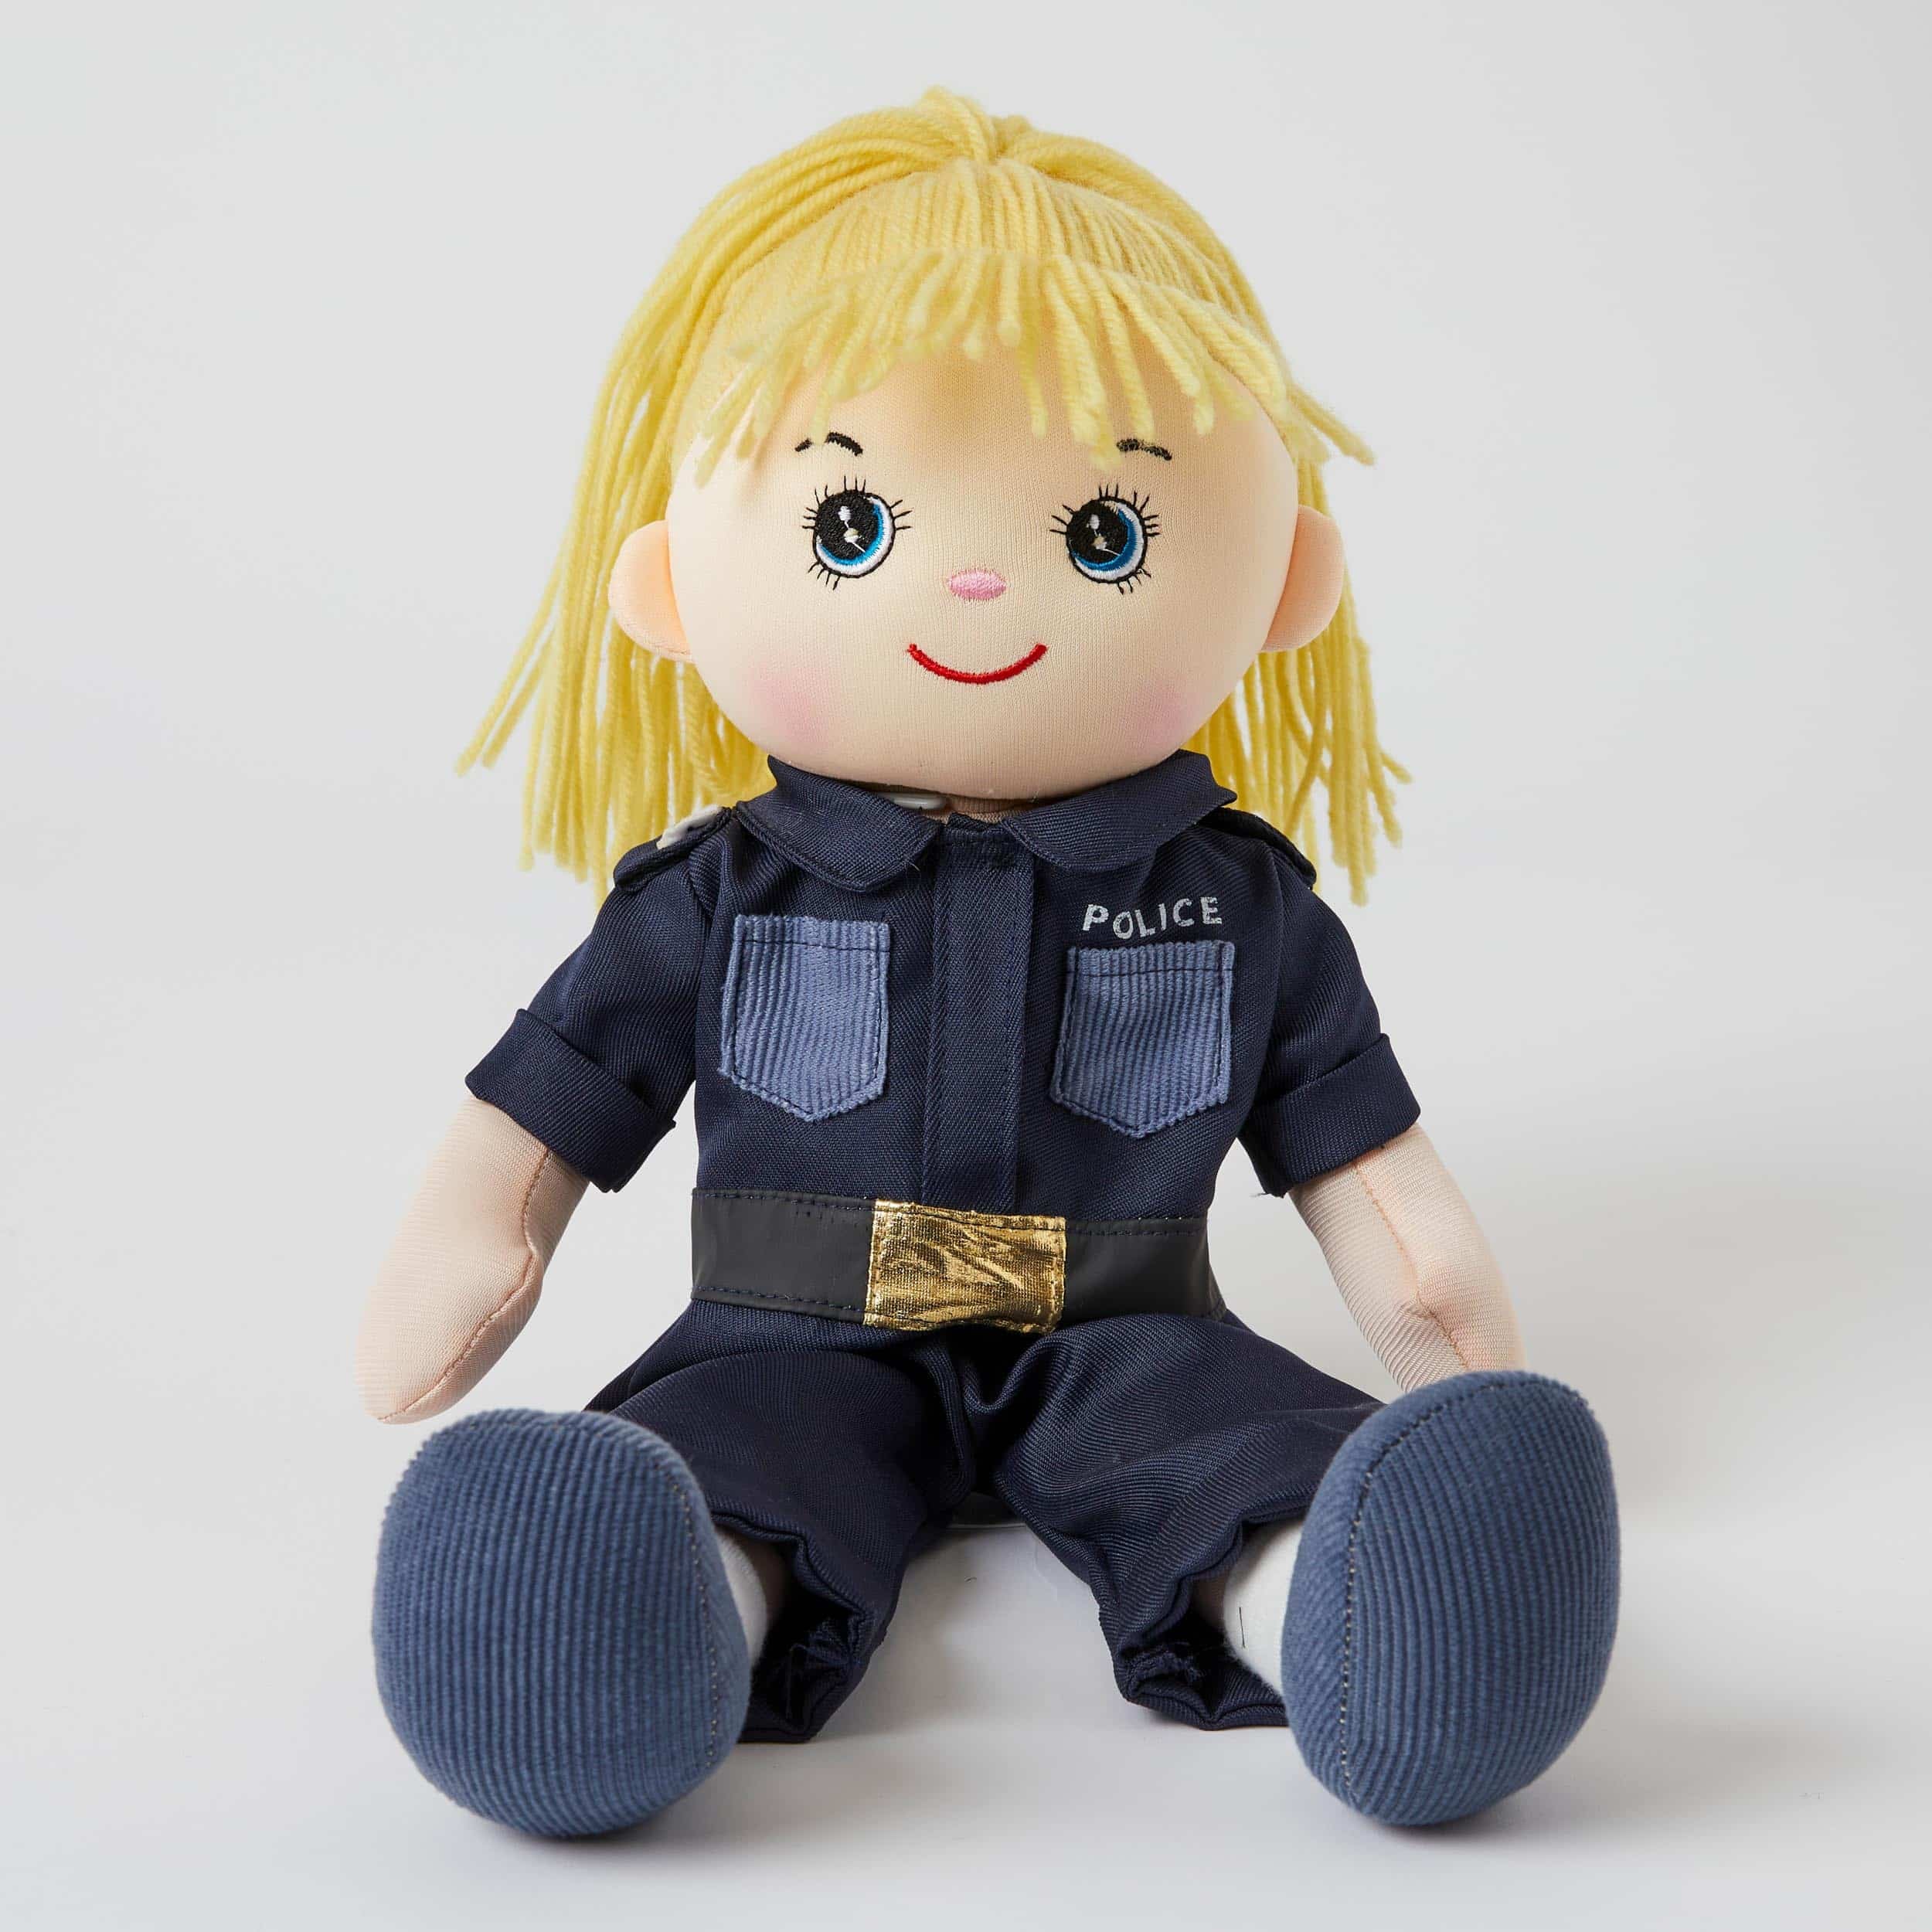 Jiggle and Giggle - My Best Friend Lizzy The Police Officer Doll